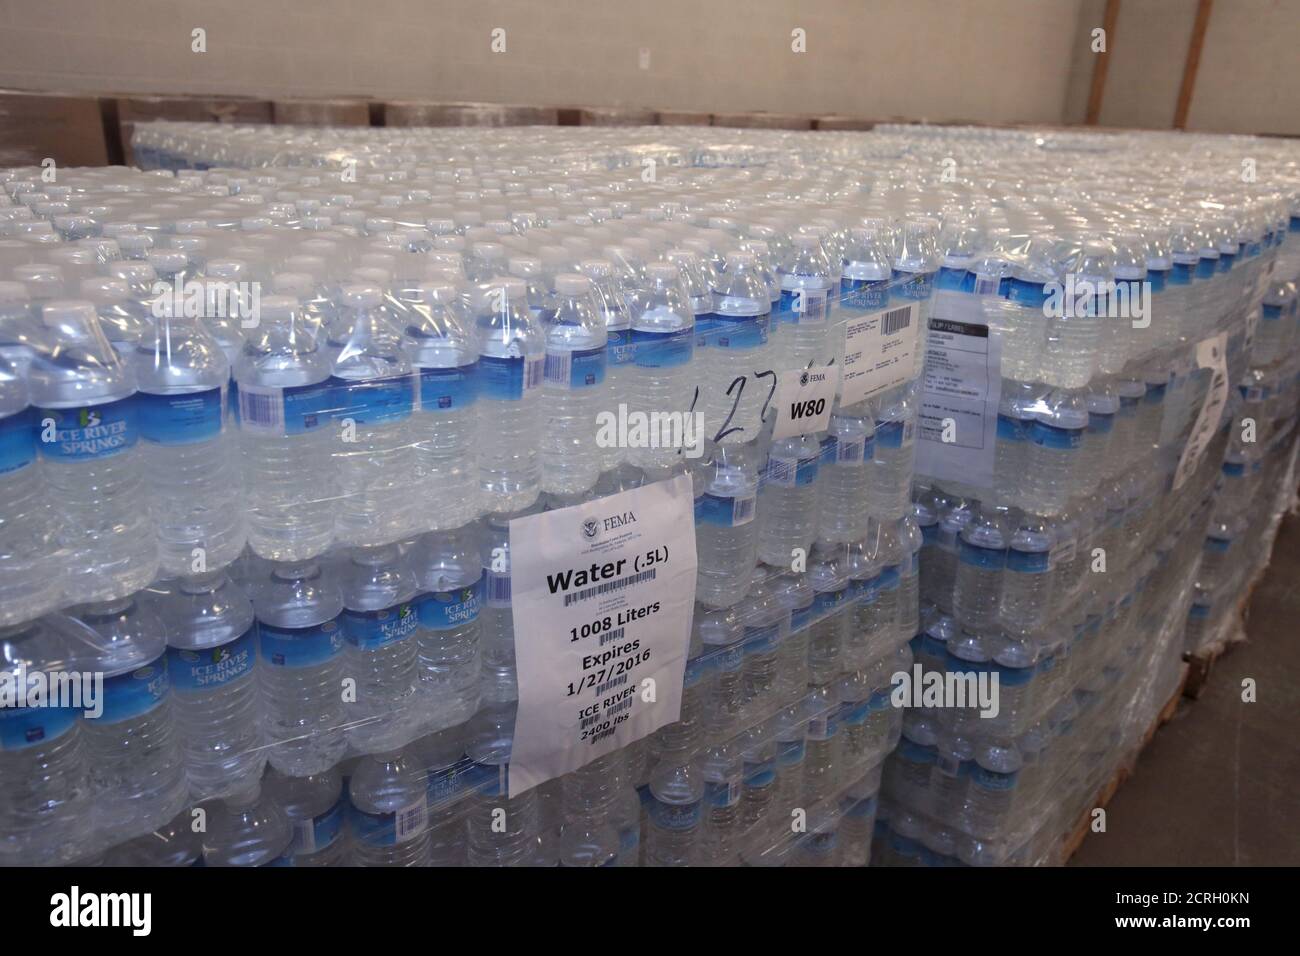 Stacks of bottled water are held at the Food Bank of Eastern Michigan warehouse and will be distributed to the public, after elevated lead levels were found in the city's water, in Flint, Michigan, December 16, 2015.     REUTERS/Rebecca Cook Stock Photo